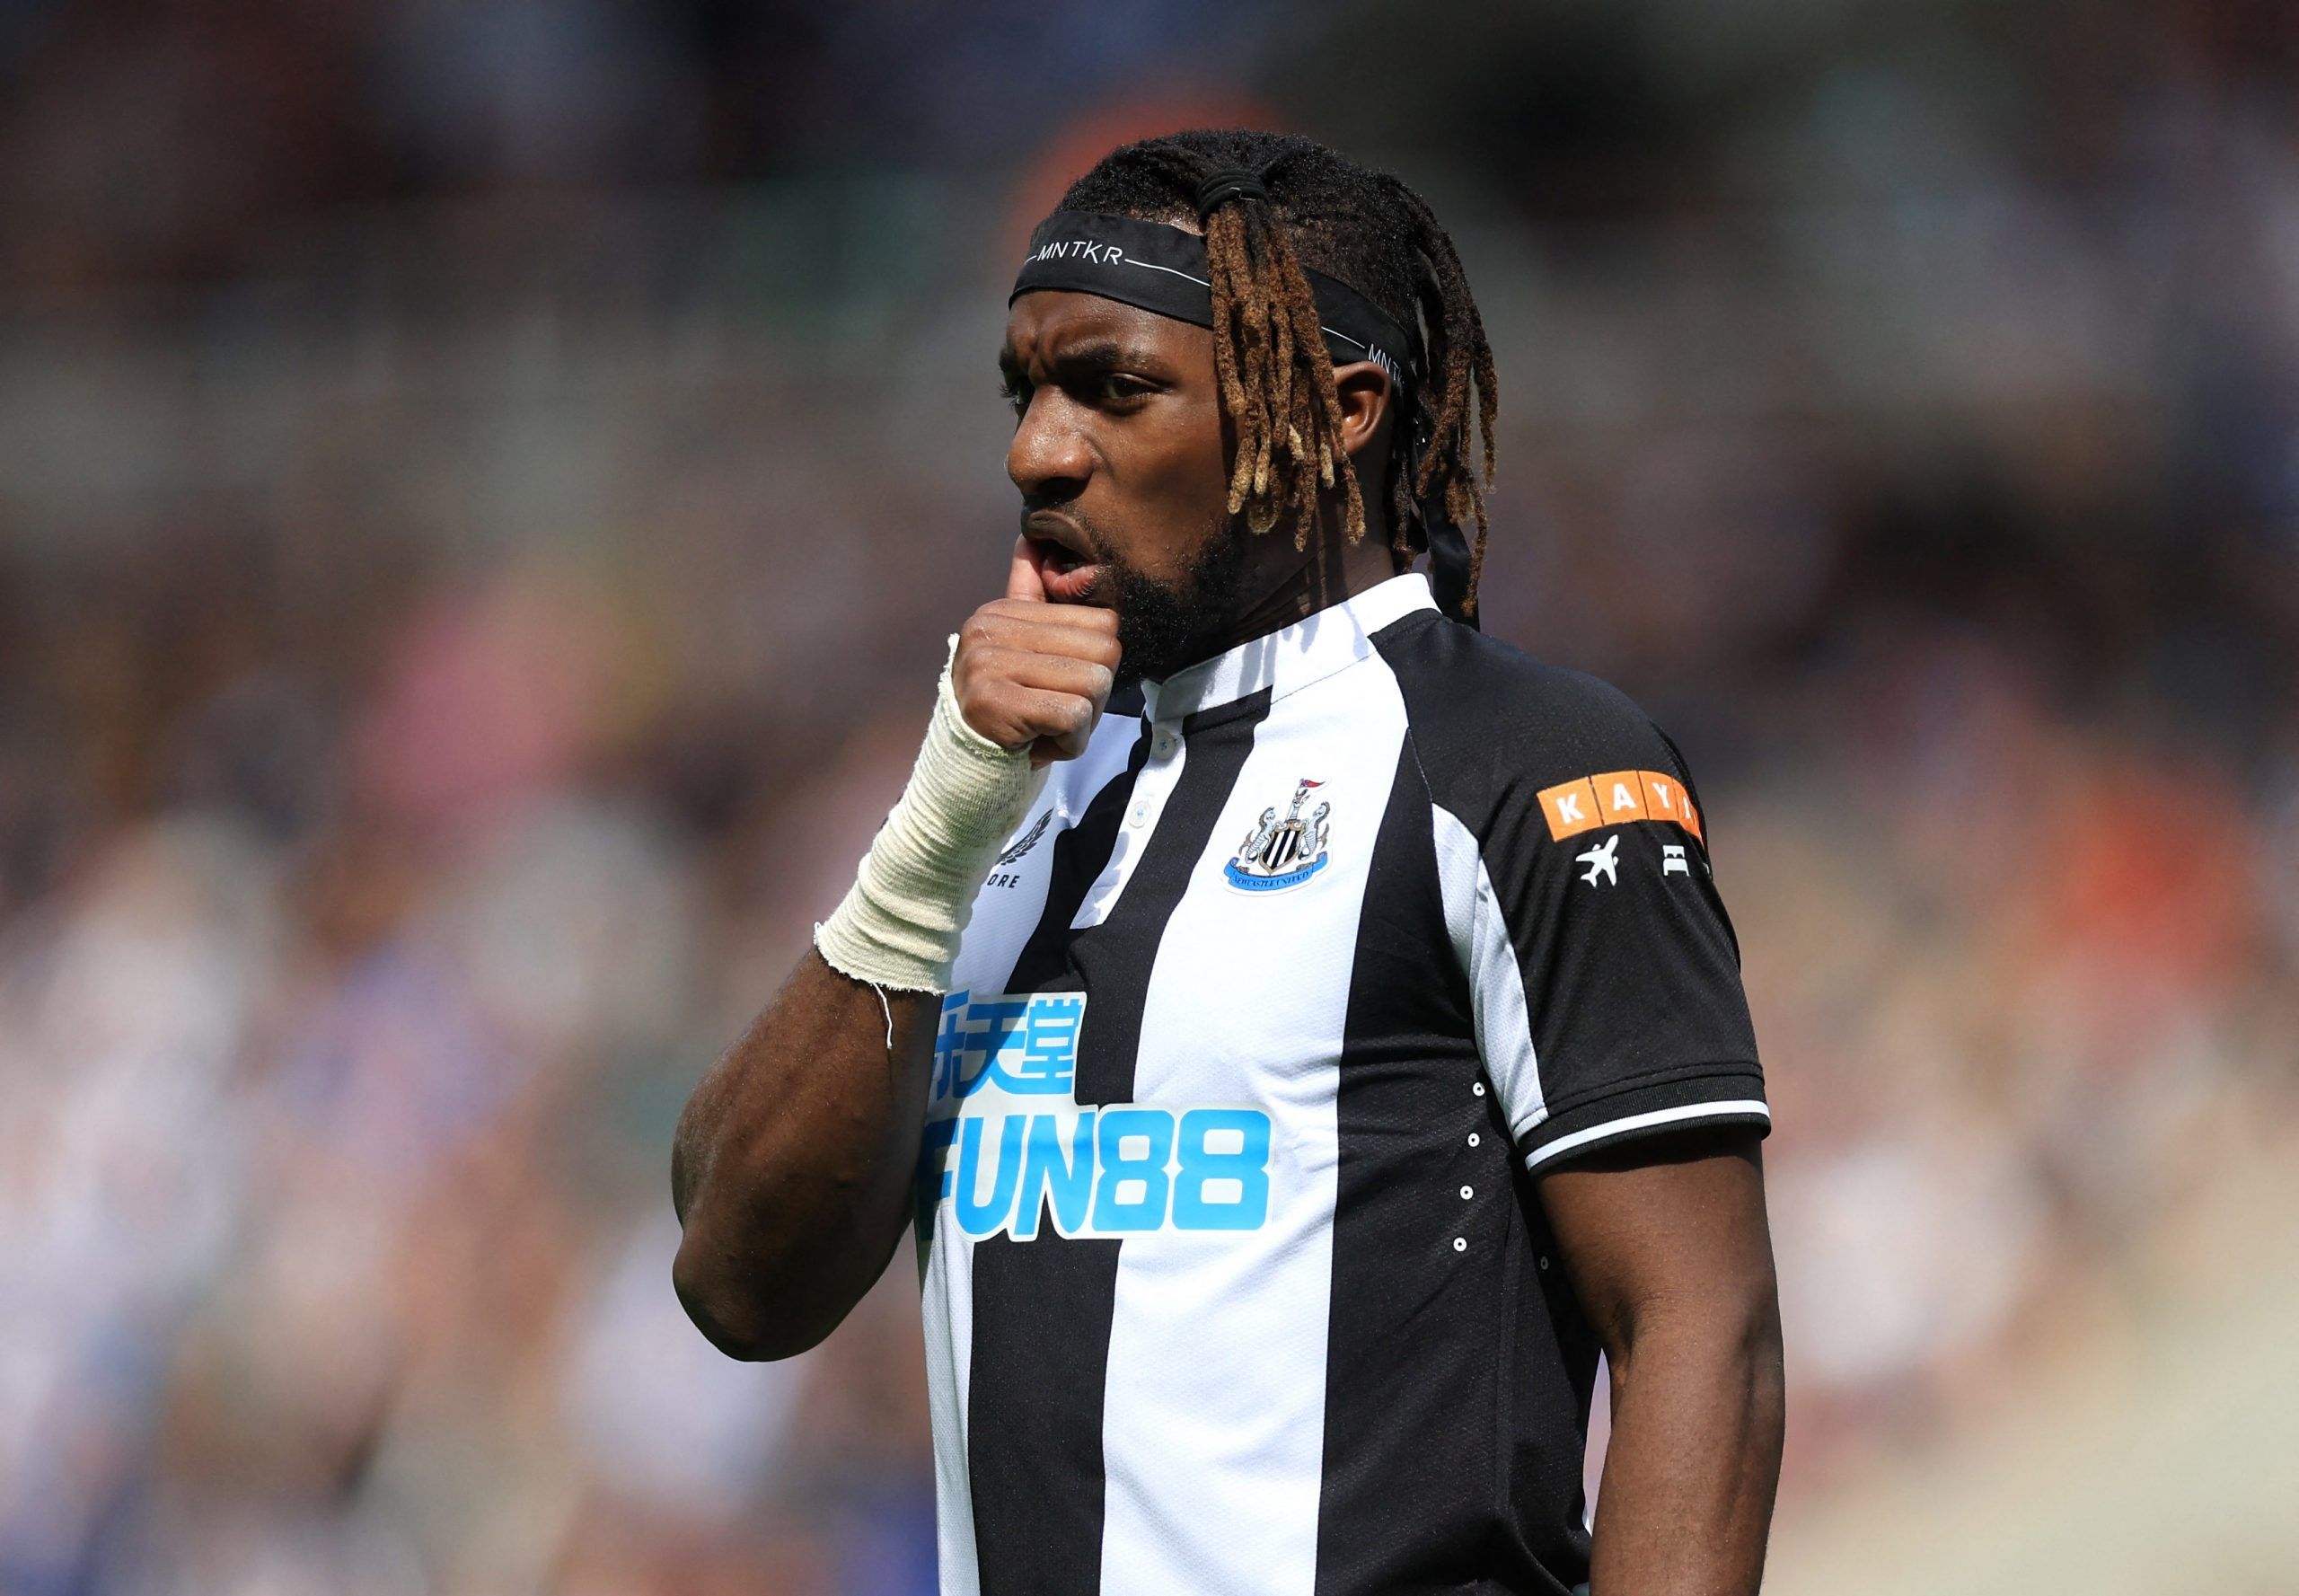 allan-saint-maximin-newcastle-united-wolverhampton-wanderers-bruno-lage-premier-league-transfer-news-neves-latestSoccer Football - Premier League - Newcastle United v Liverpool - St James' Park, Newcastle, Britain - April 30, 2022 Newcastle United's Allan Saint-Maximin reacts Action Images via Reuters/Lee Smith EDITORIAL USE ONLY. No use with unauthorized audio, video, data, fixture lists, club/league logos or 'live' services. Online in-match use limited to 75 images, no video emulation. No use 